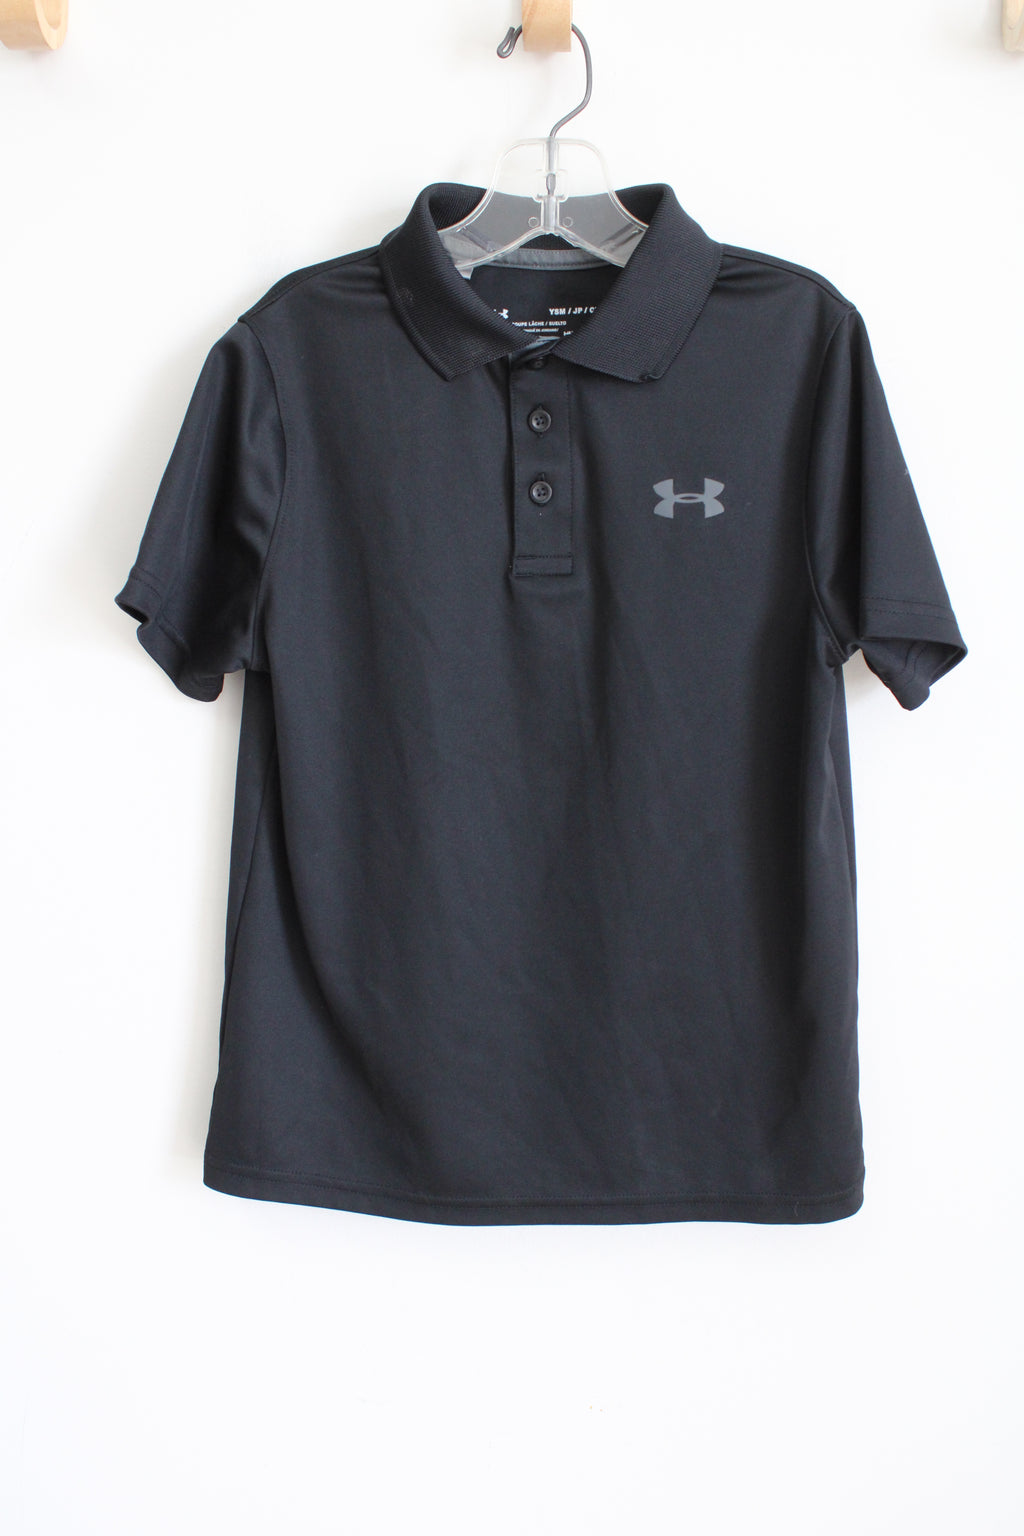 Under Armour Black Polo Shirt | Youth S